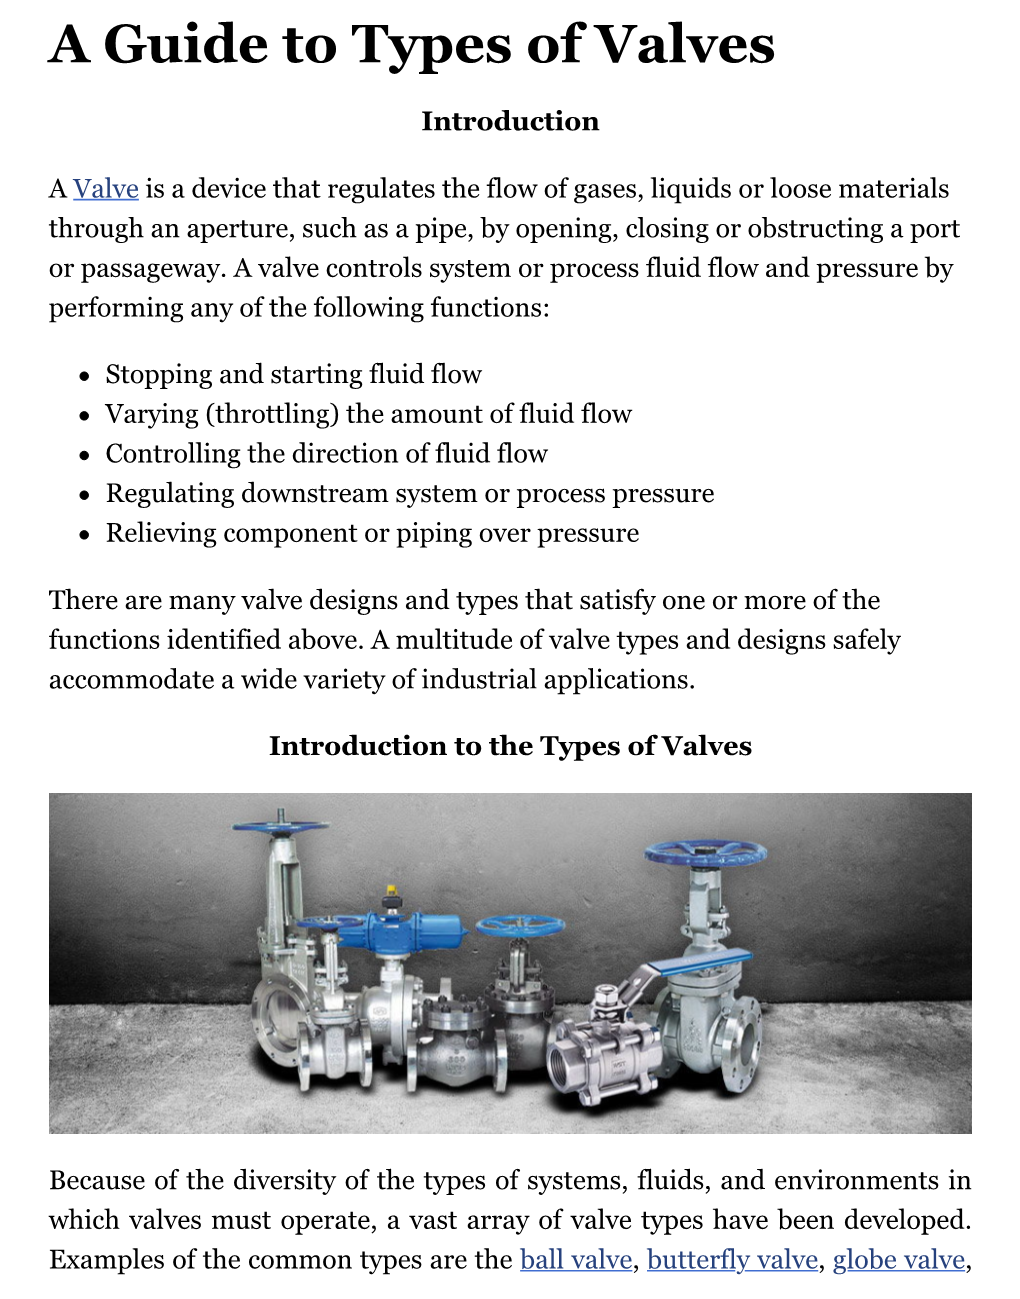 A Guide to Types of Valves